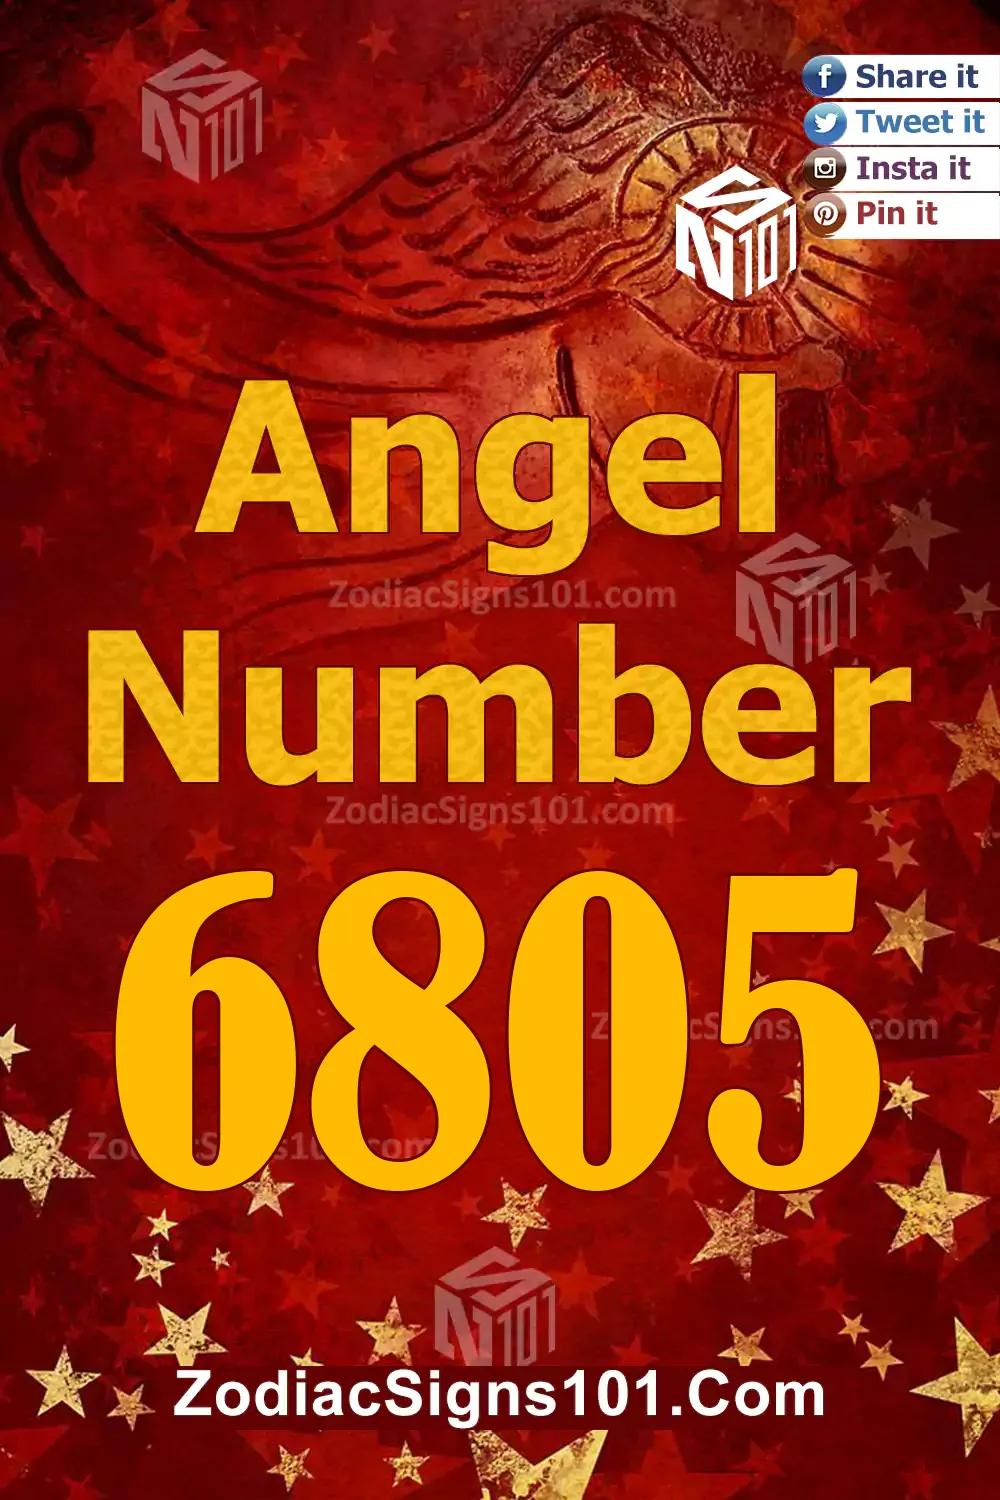 6805 Angel Number Meaning